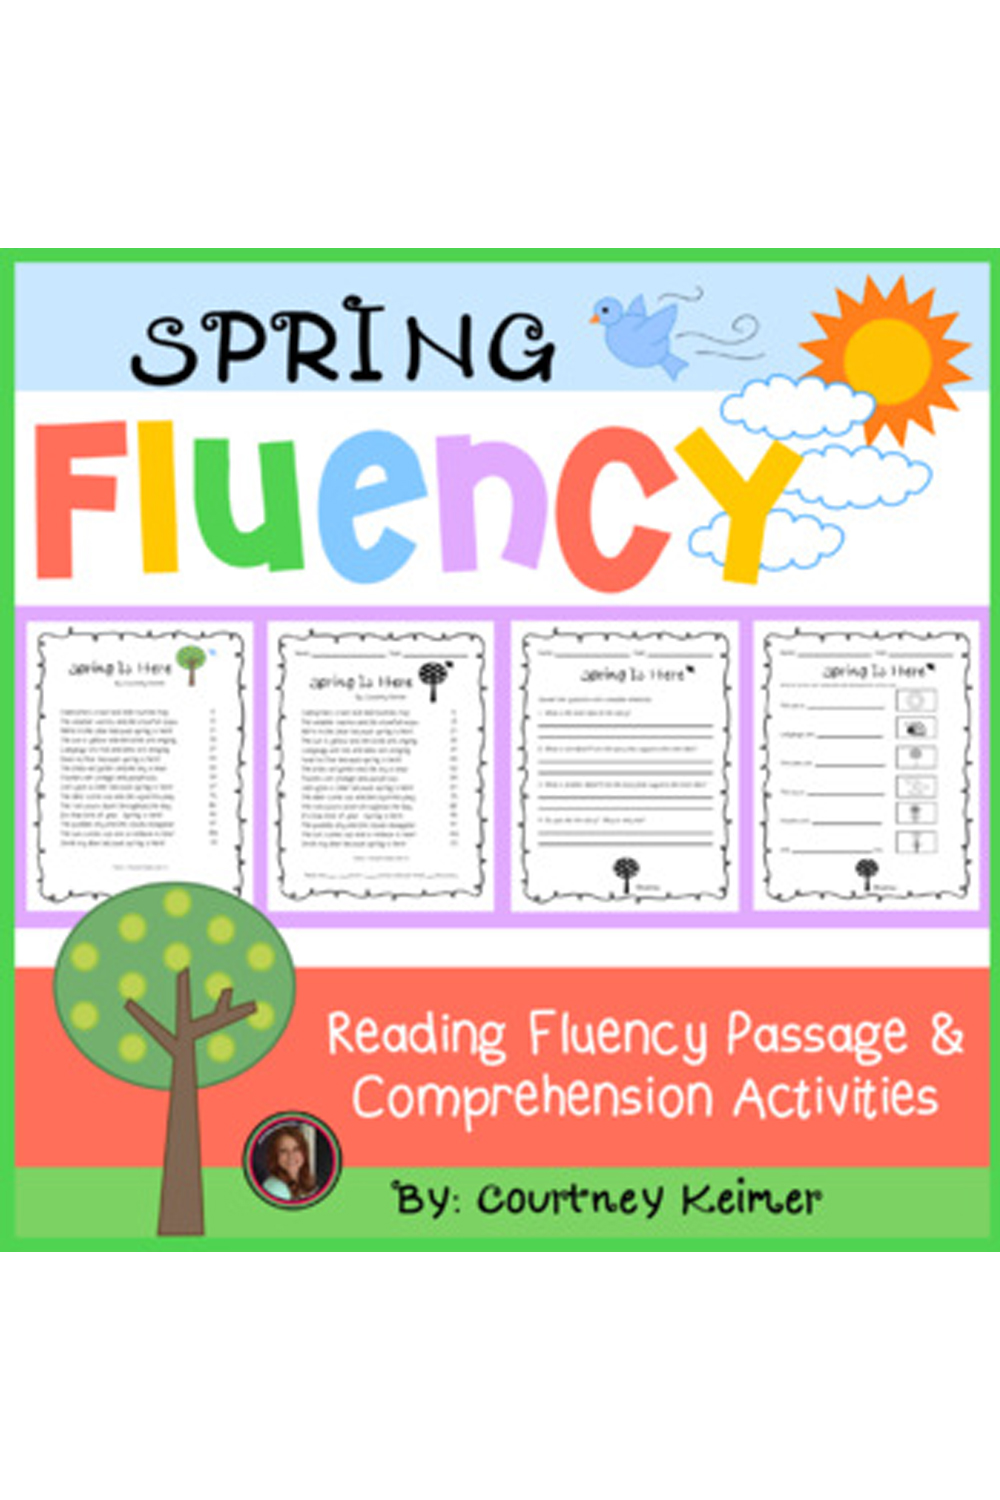 Spring Is Here Fluency Passage and Comprehension Questions pinterest preview image.